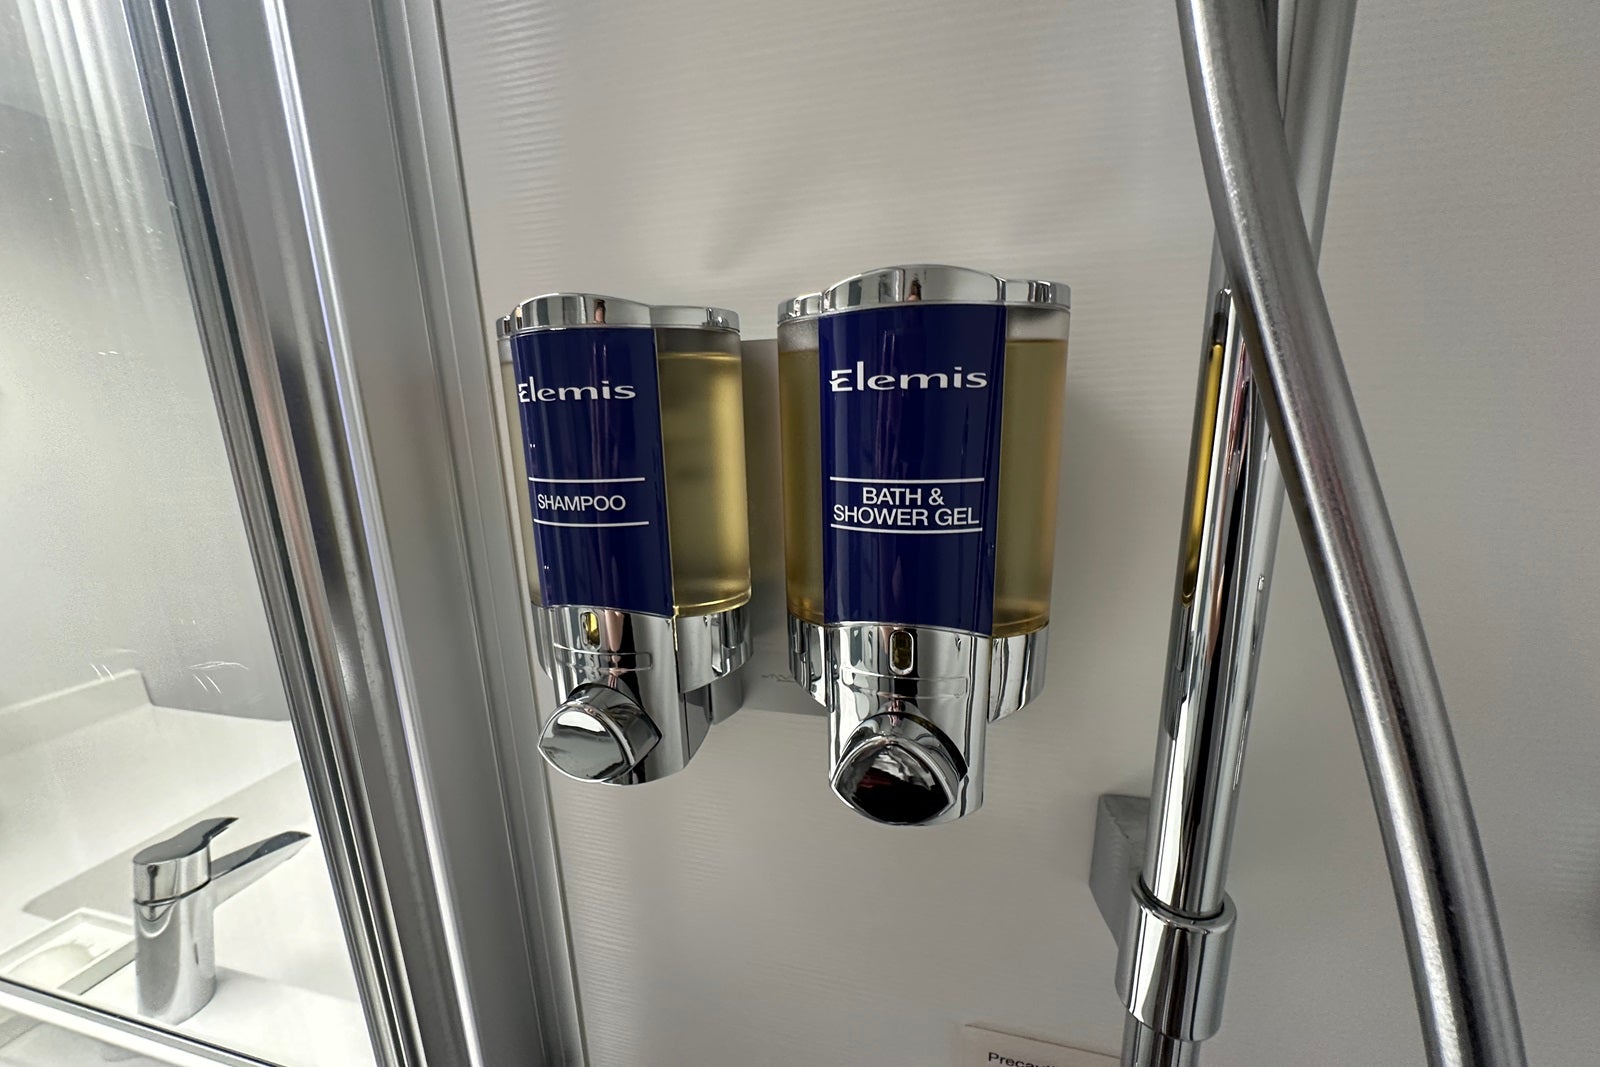 Two bottles of Elemis shower gel and shampoo hanging on the wall of a shower